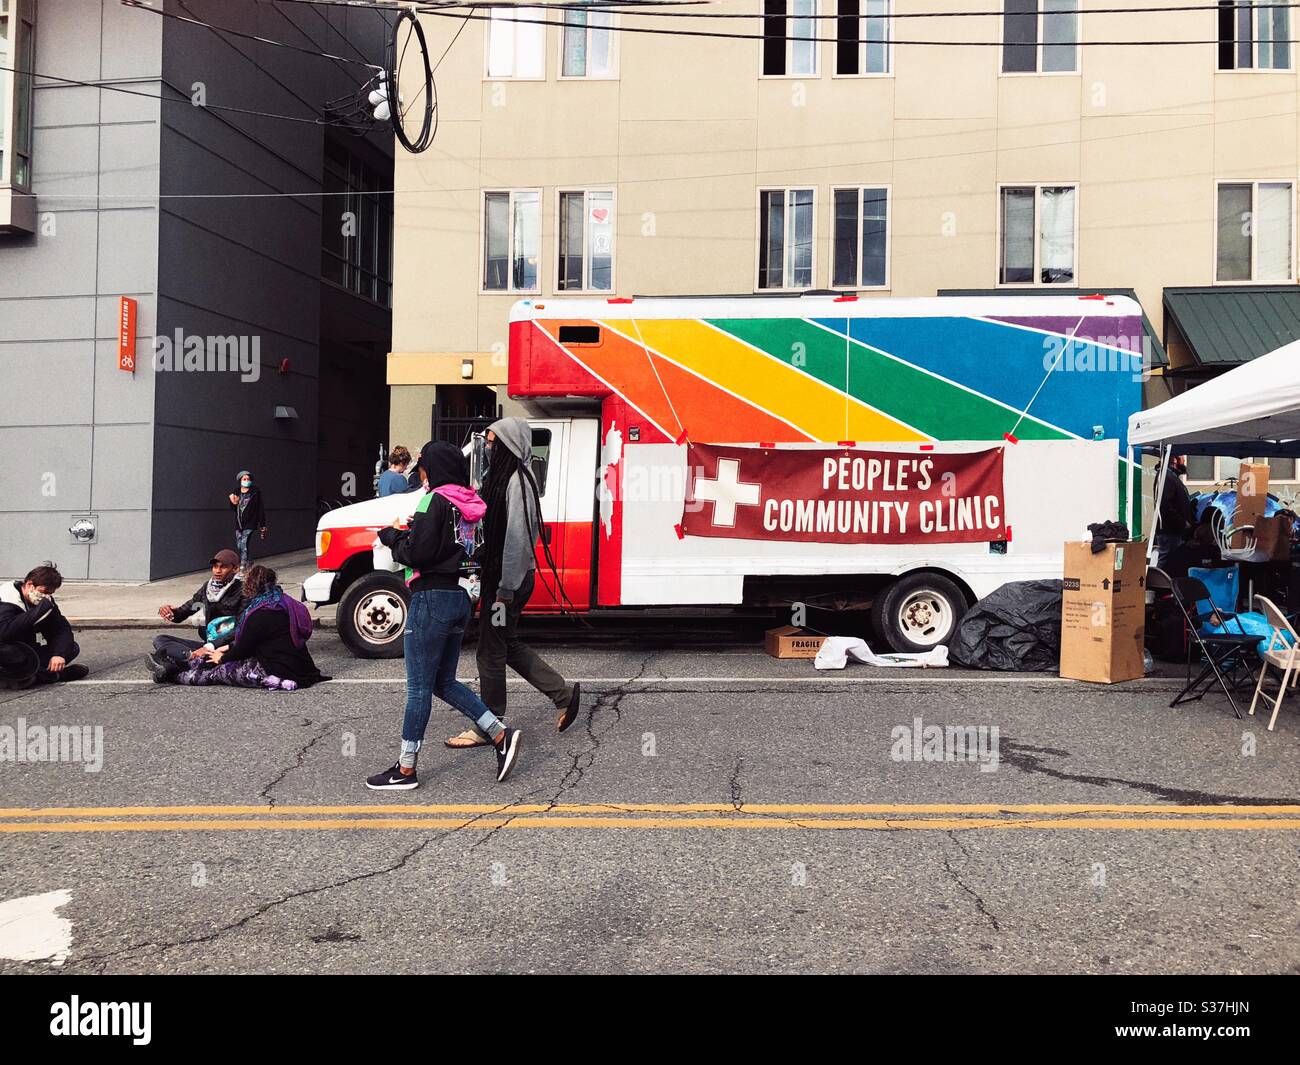 Ambulance vehicle painted rainbow with sign People’s Community Clinic on 12th street in CHAZ CHOP autonomous zone on Capitol hill in Seattle, June 2020 Stock Photo